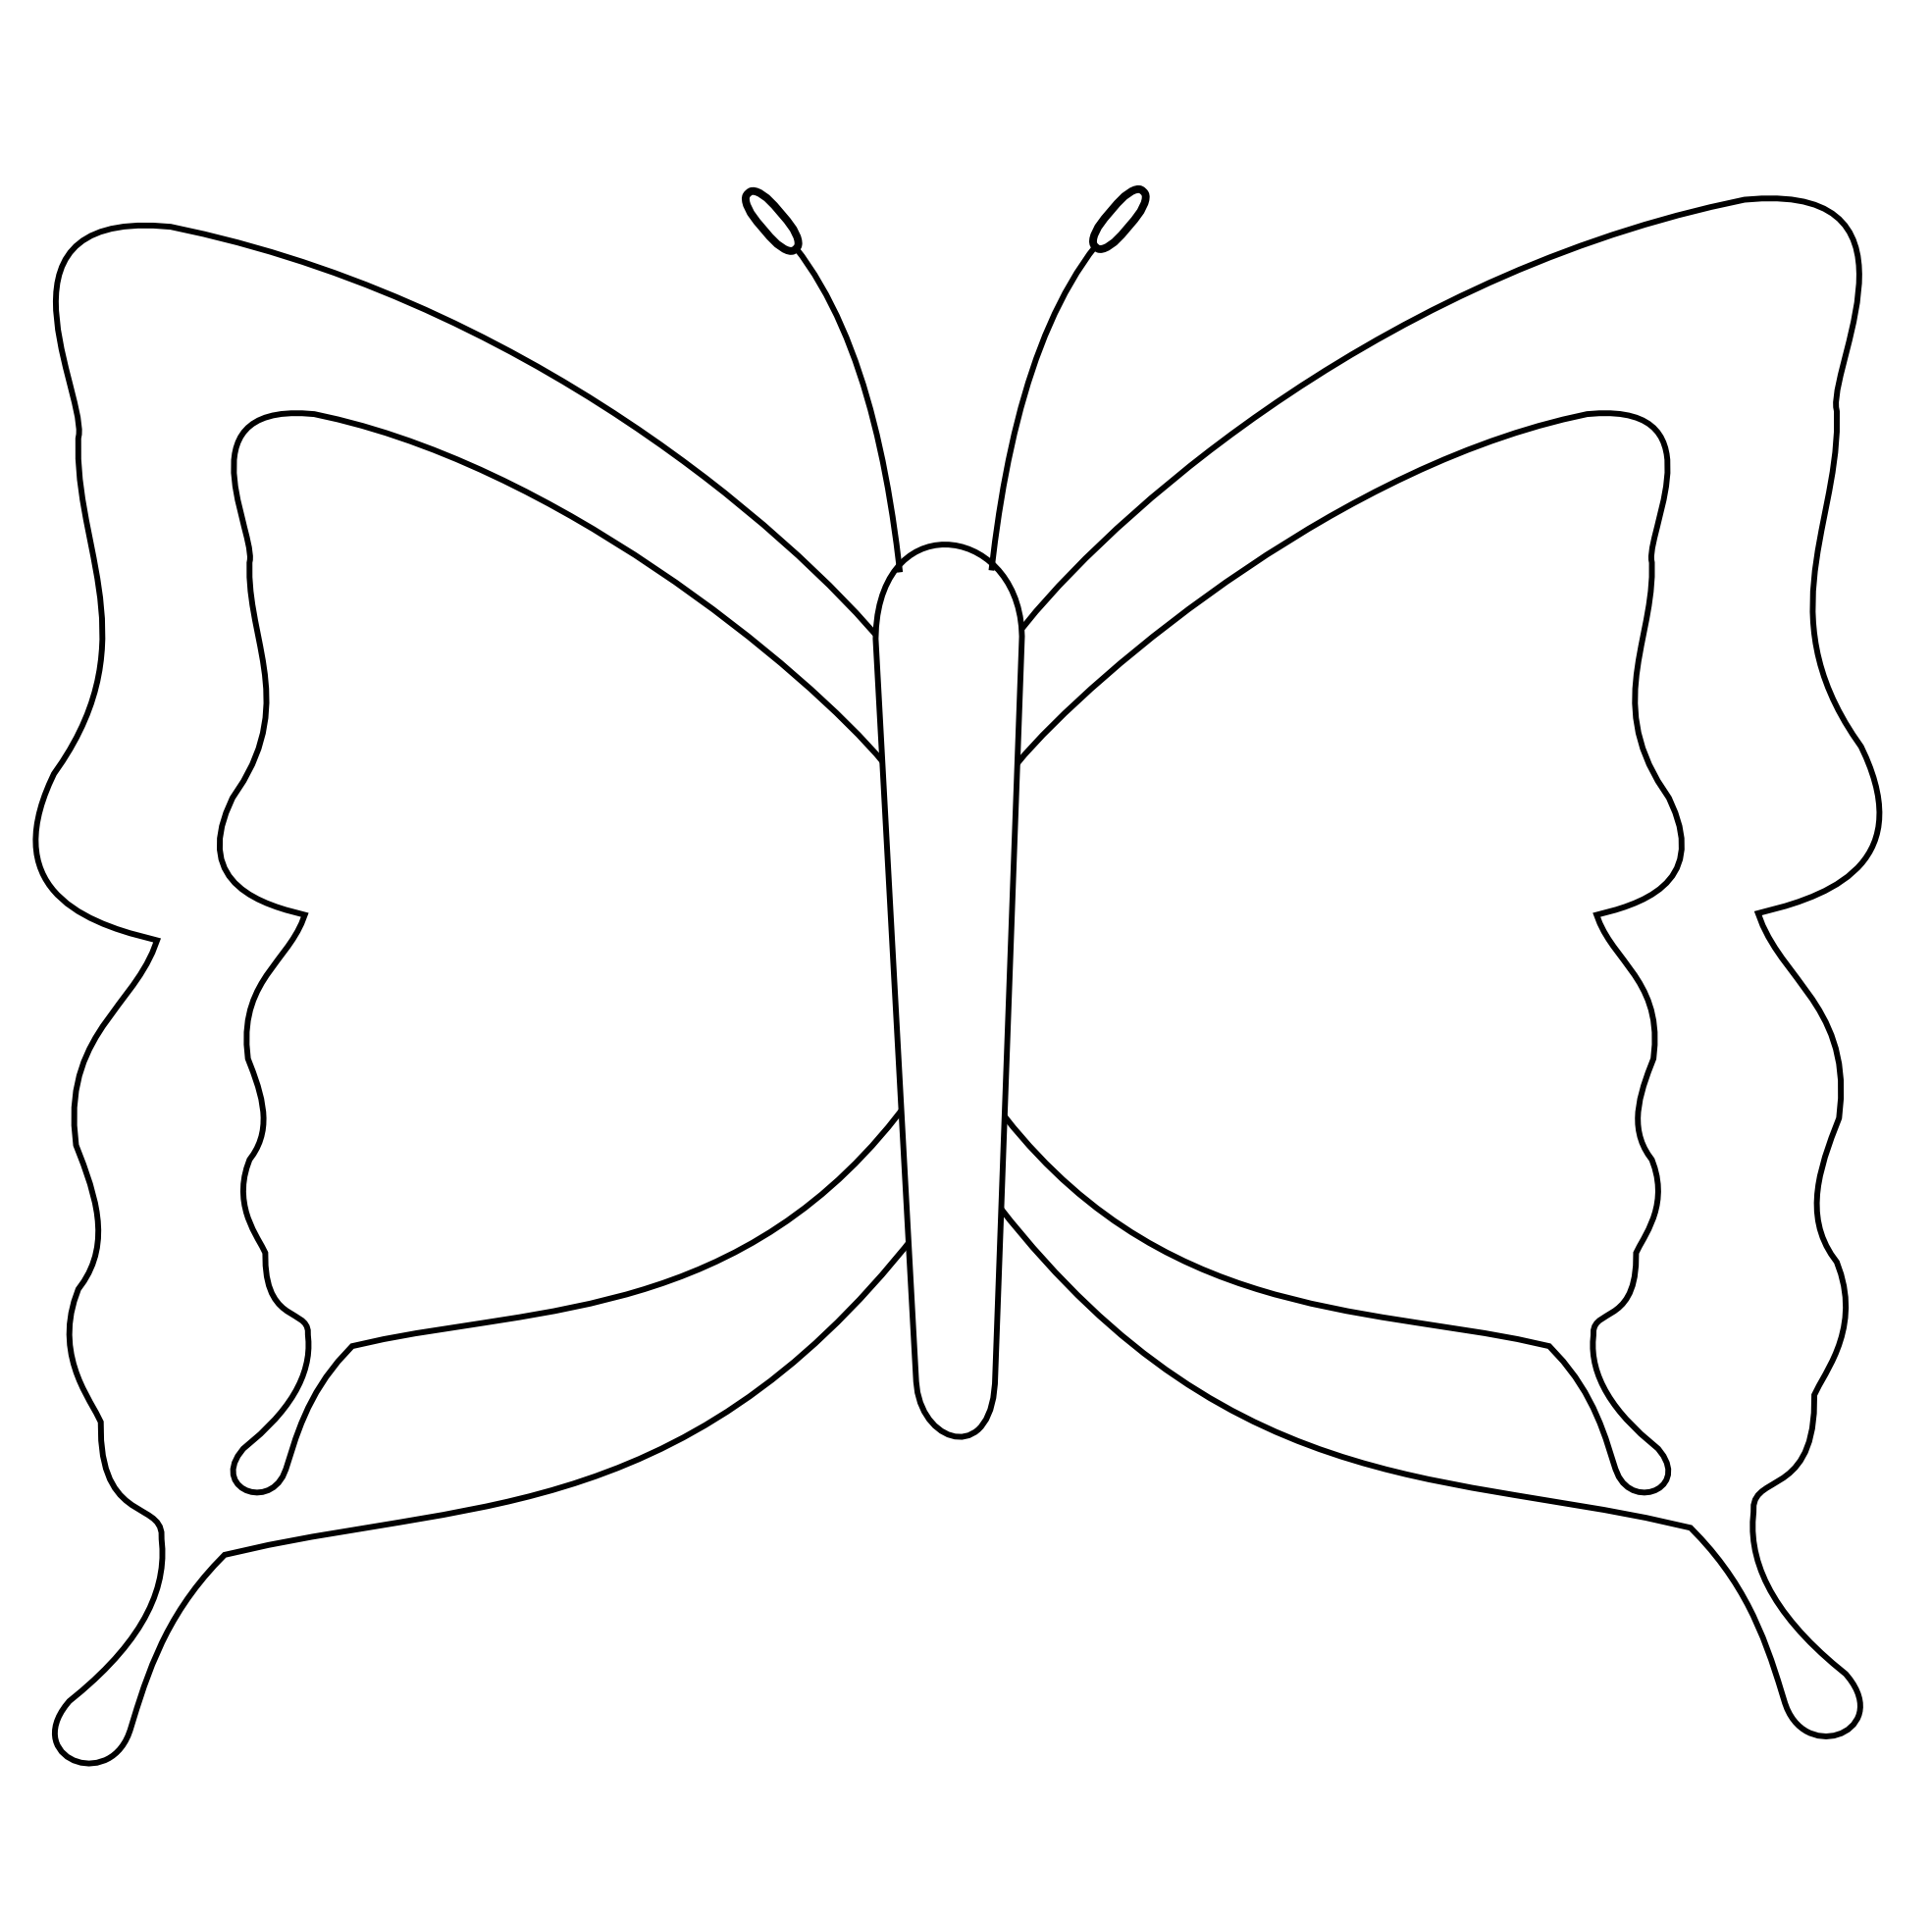 Butterfly Clipart Black And White - ClipArt Best